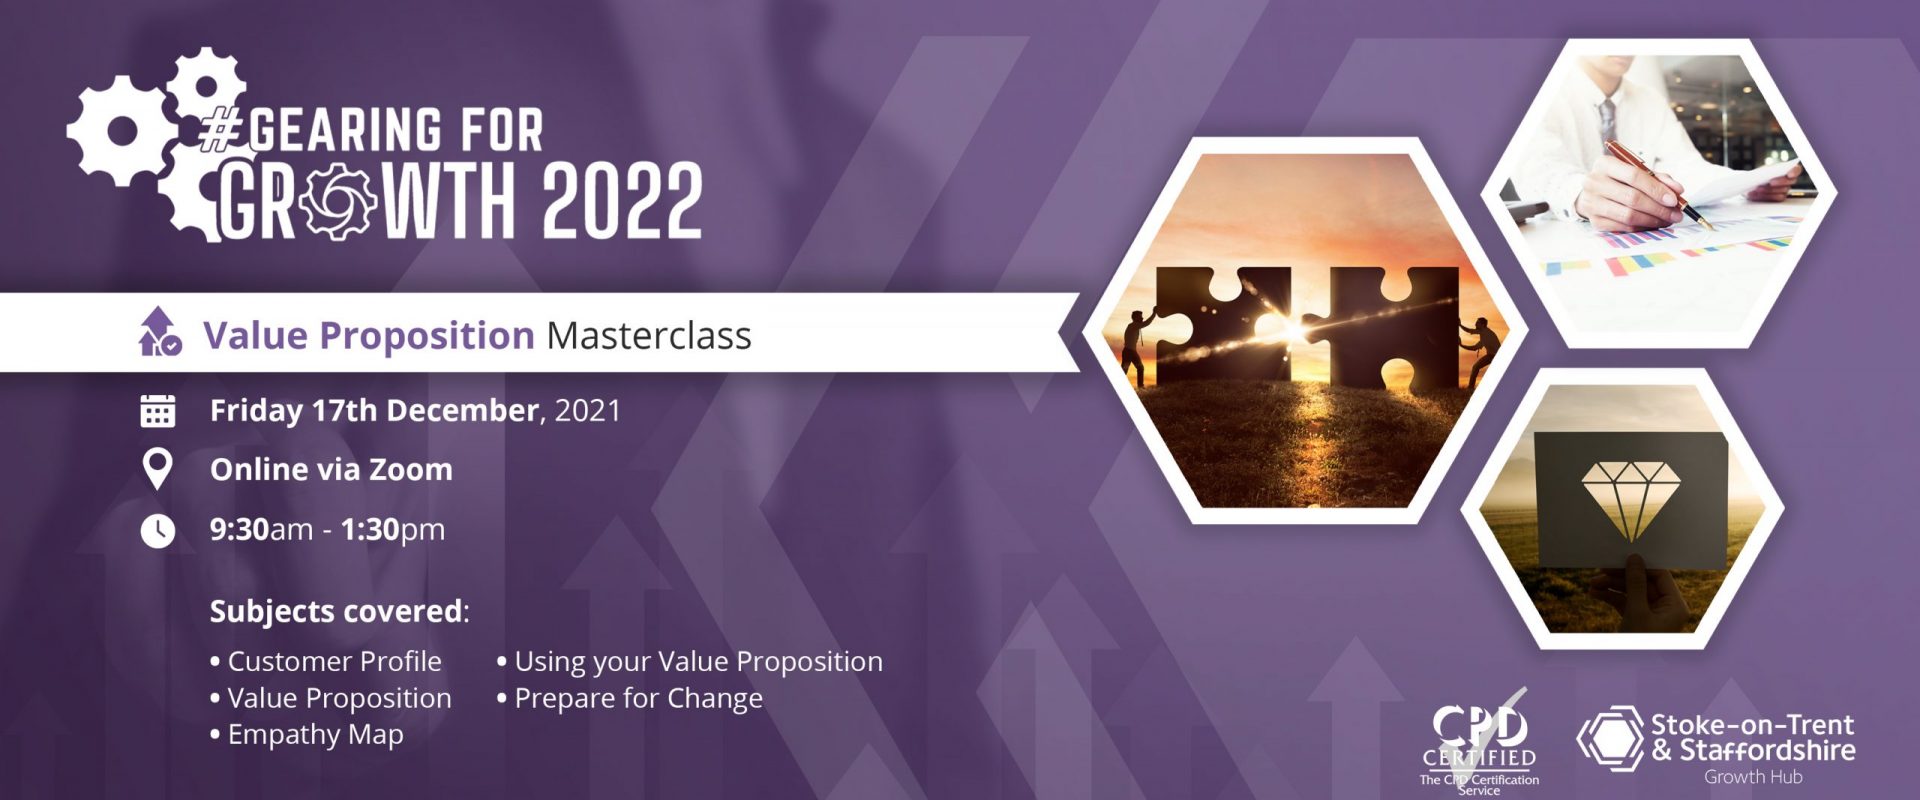 #GEARINGFORGROWTH2022: Value Proposition Masterclass - CPD Accredited